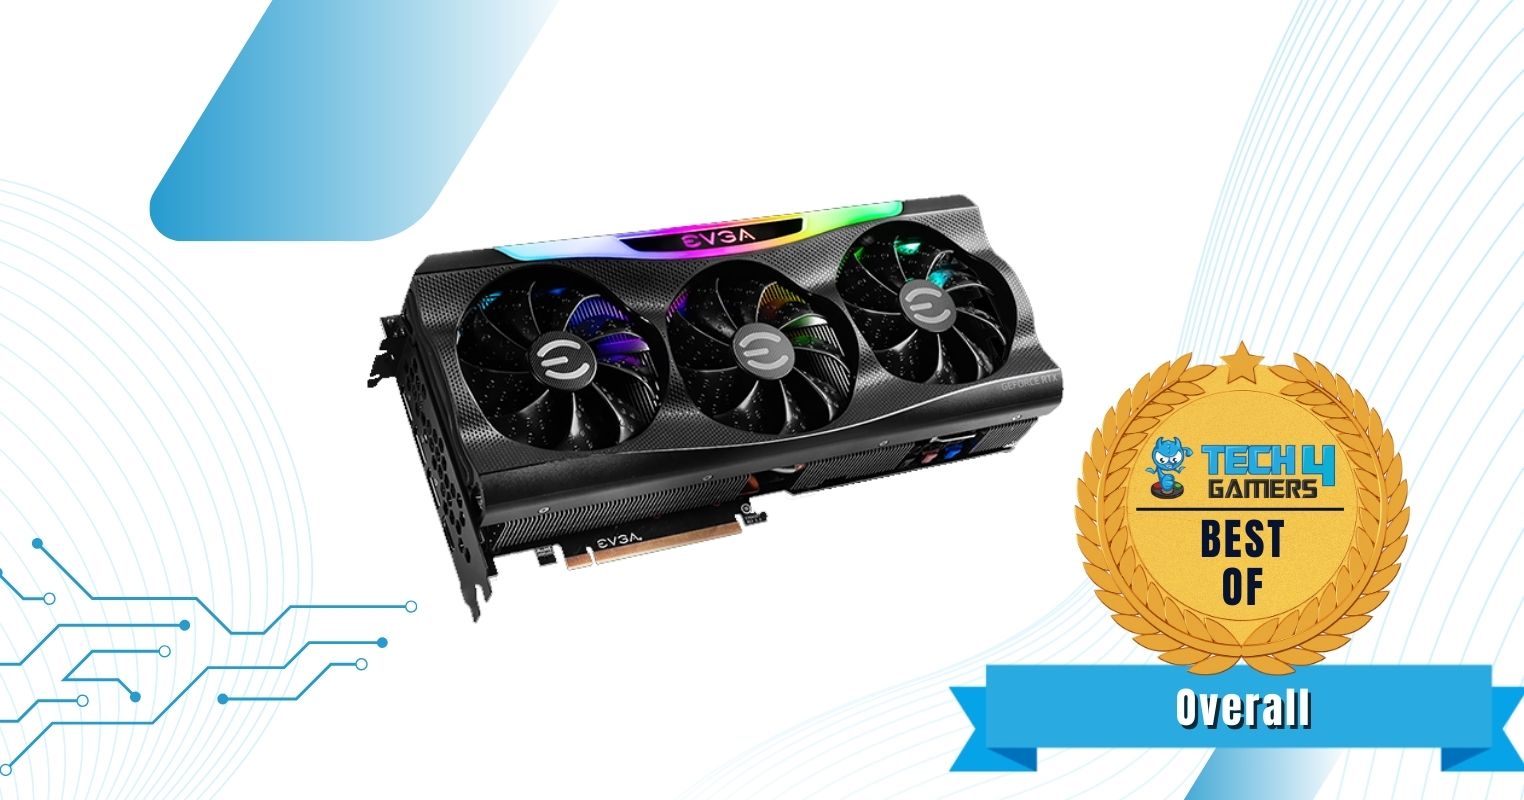 Best Overall RTX 3090 Graphics Card - EVGA GeForce RTX 3090 FTW3 Ultra Gaming